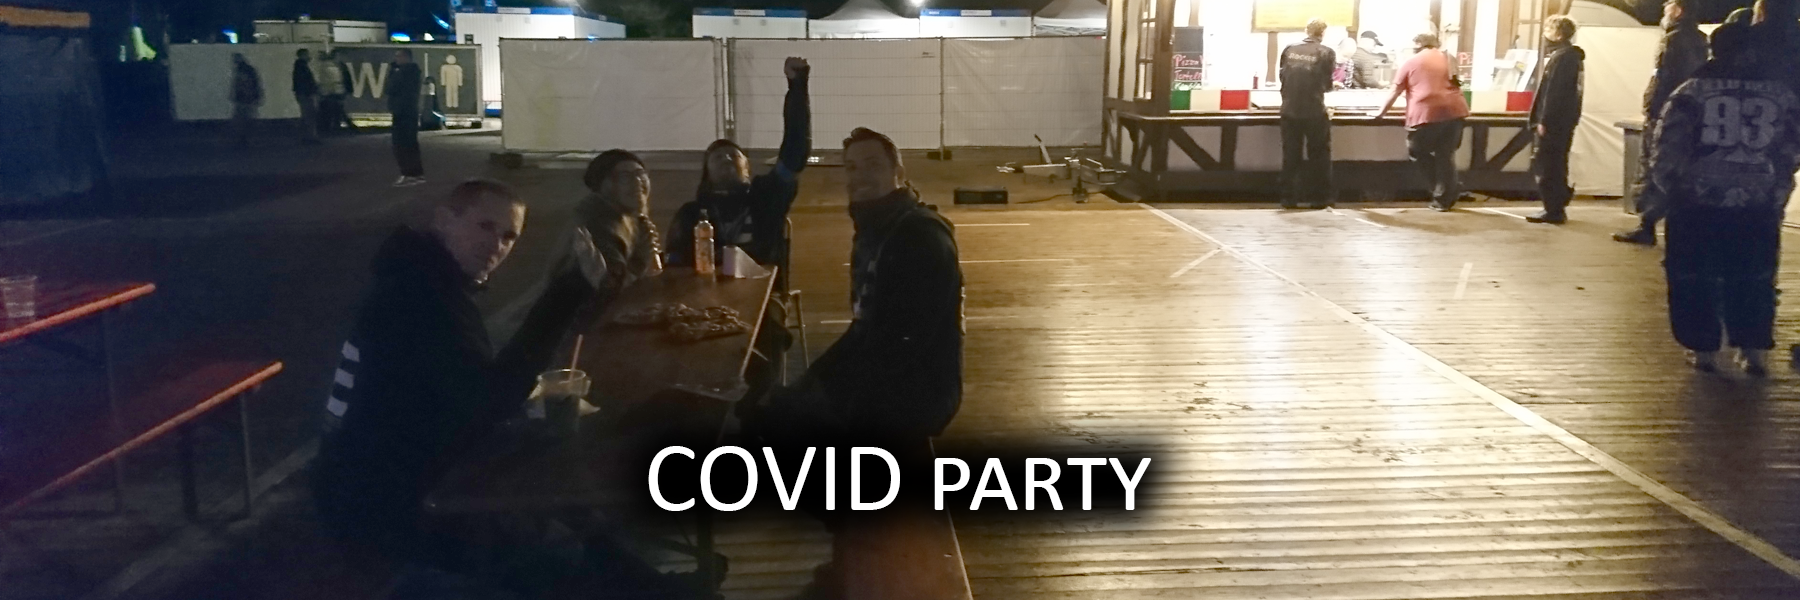 COVID party